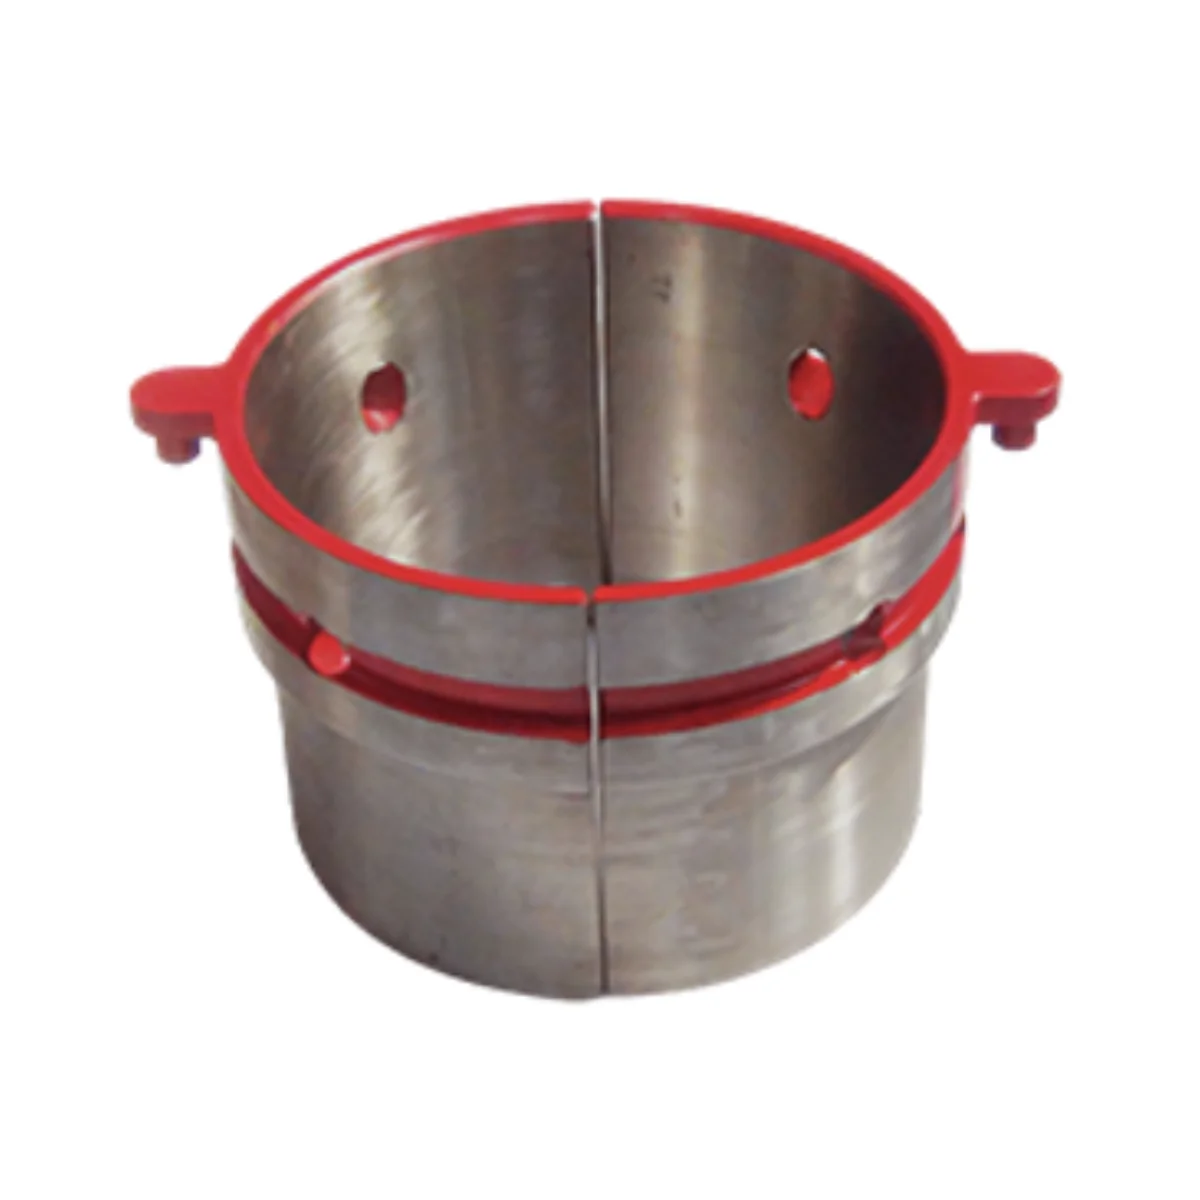 Master Bushing Insert Bowl No.1, an essential component of oilfield handling tools. This insert bowl is designed to fit within the master bushing, providing support and stability for the drill string during drilling operations. Its precise design ensures efficient and safe handling of drilling equipment in the oilfield.